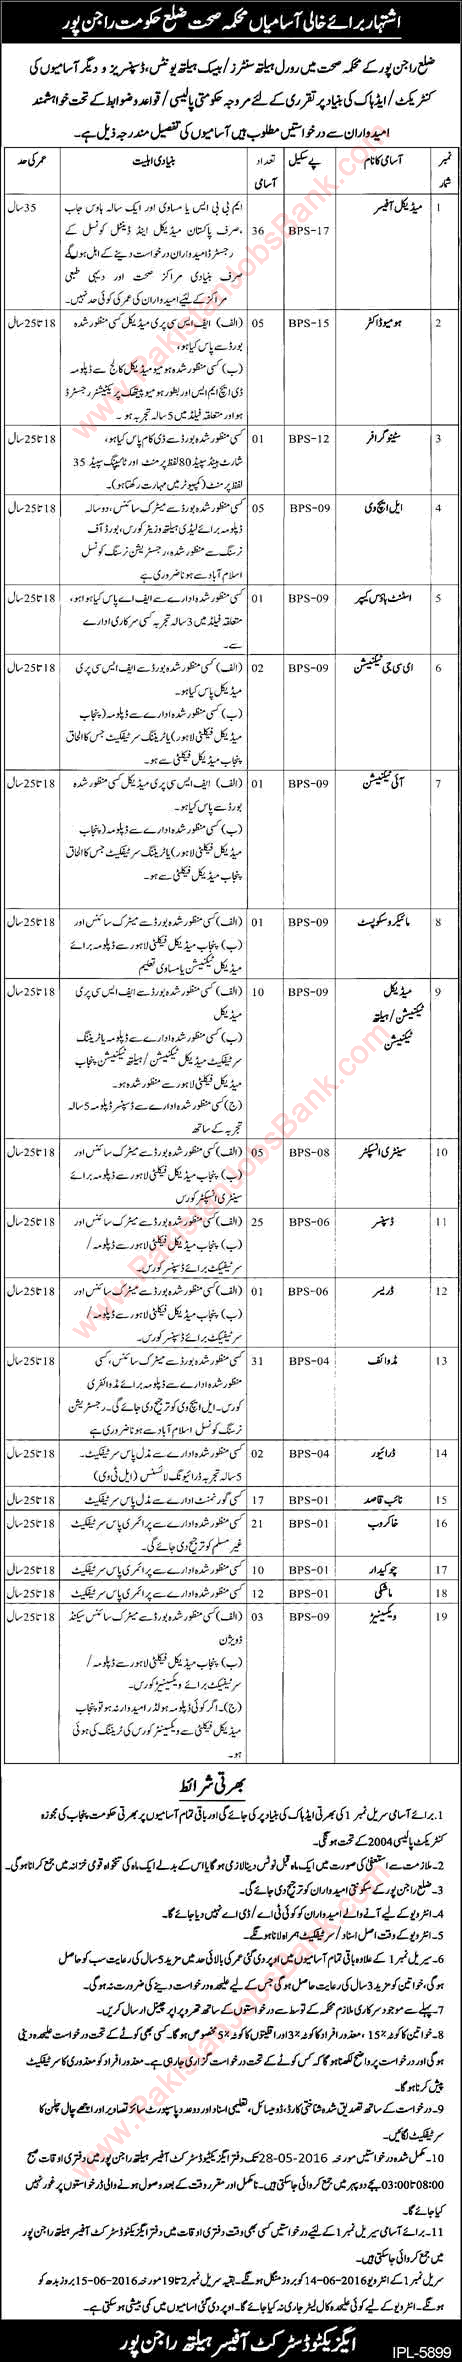 Health Department Rajanpur Jobs 2016 May Medical Officers, Technicians, Midwives & Others Latest